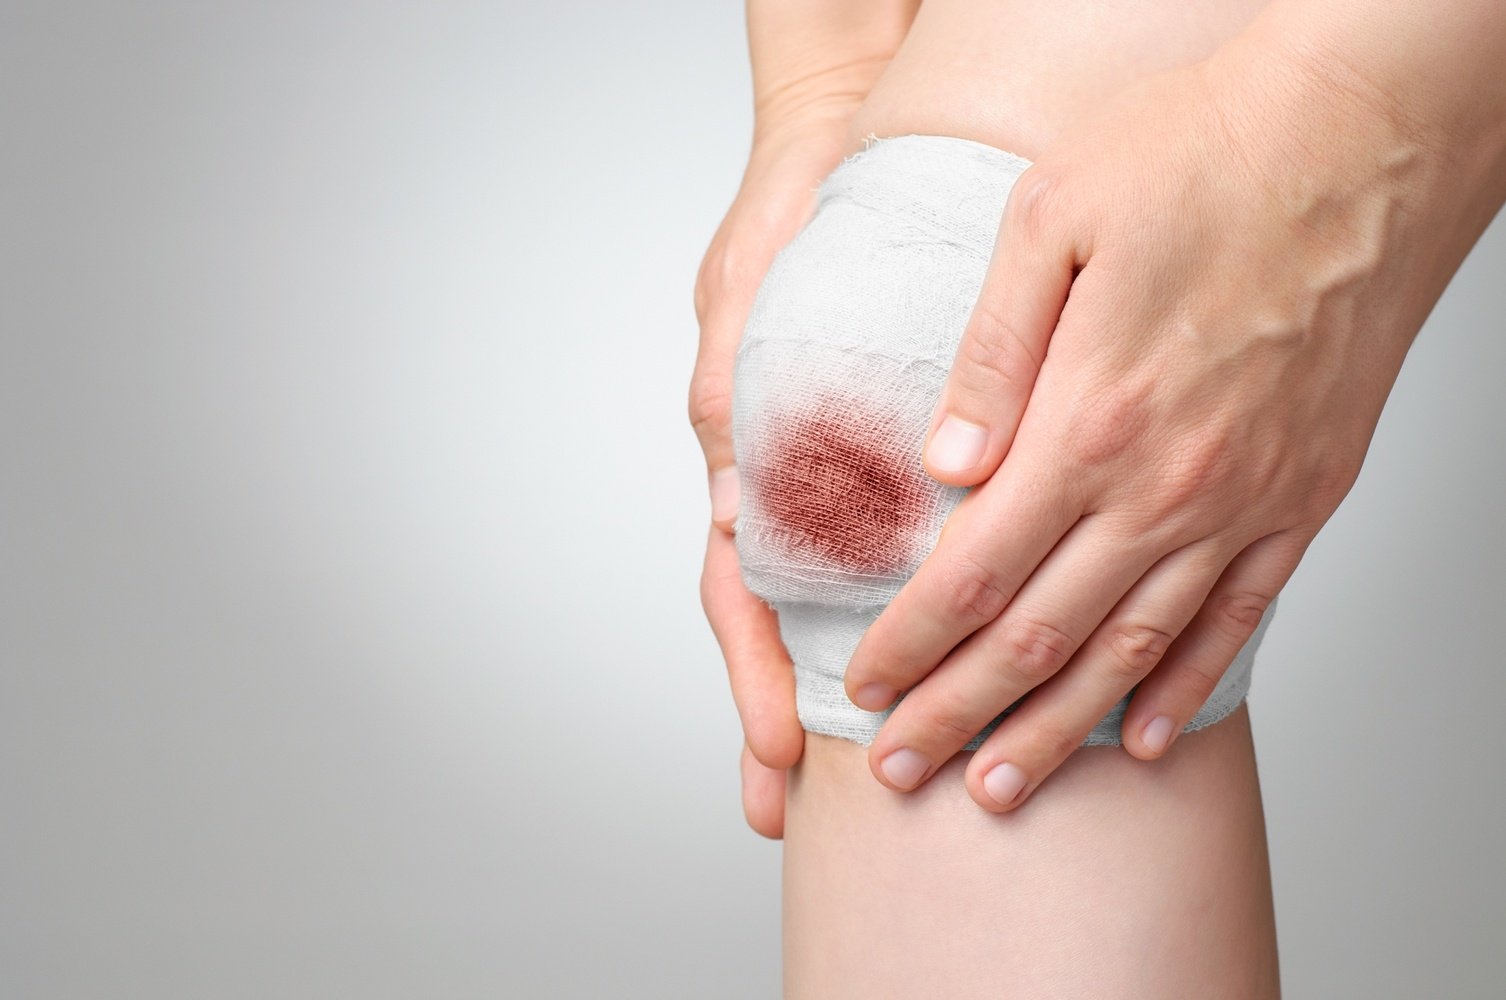 How to tell if a wound is healing or infected